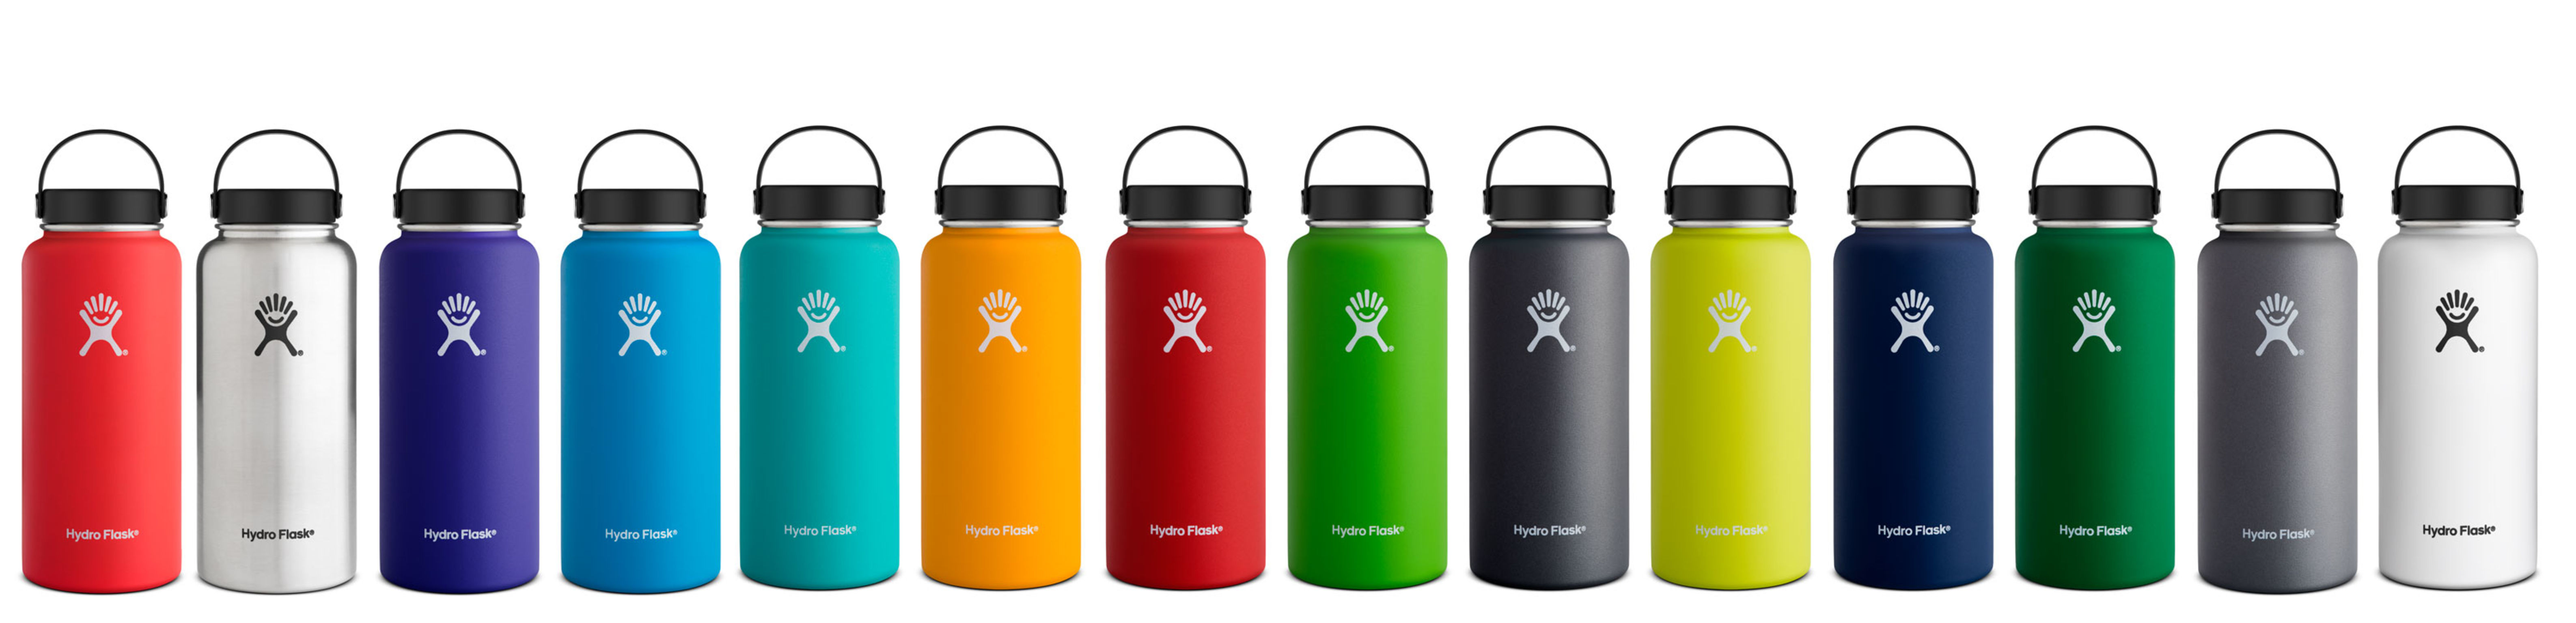 official hydro flask website